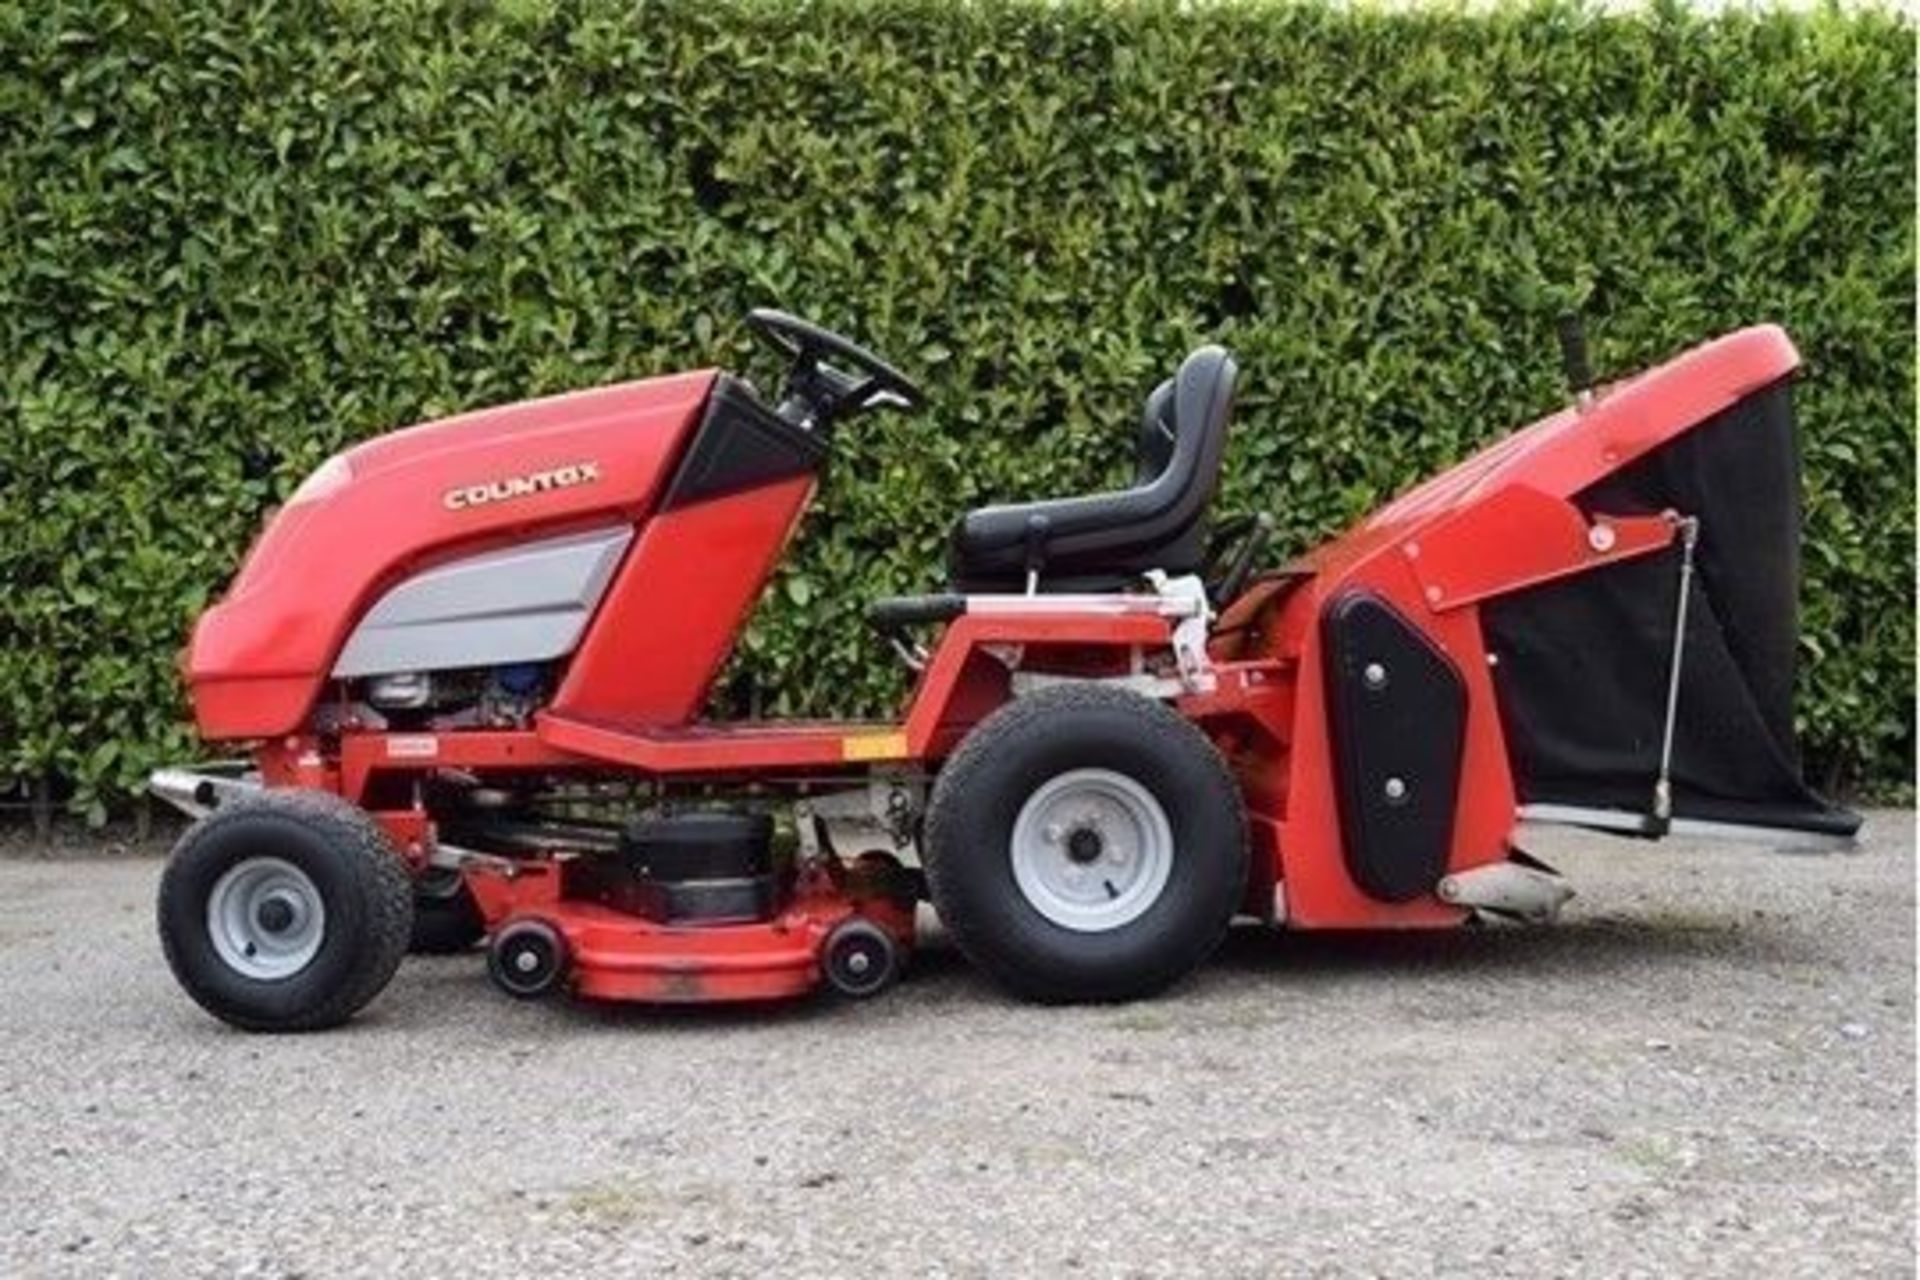 Countax C800H 44" Rear Discharge Garden Tractor With PGC. - Image 2 of 4